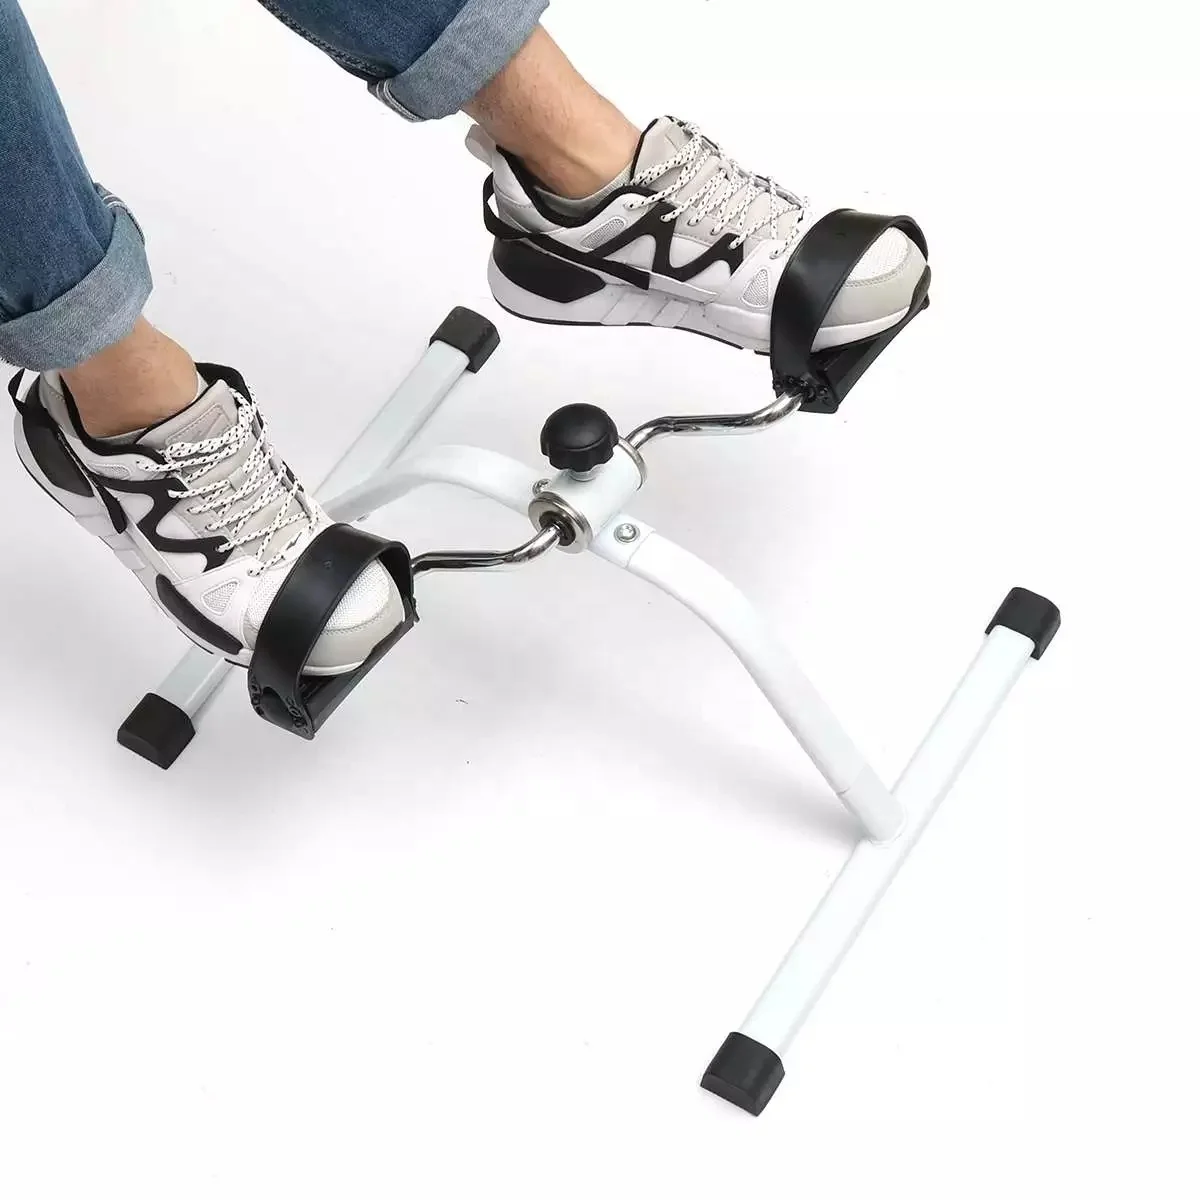 

TY Home Indoor Bicycle Mini Fitness Hand-cranked Pedal General Rehabilitation Training Physical Therapy Training Equipment, White